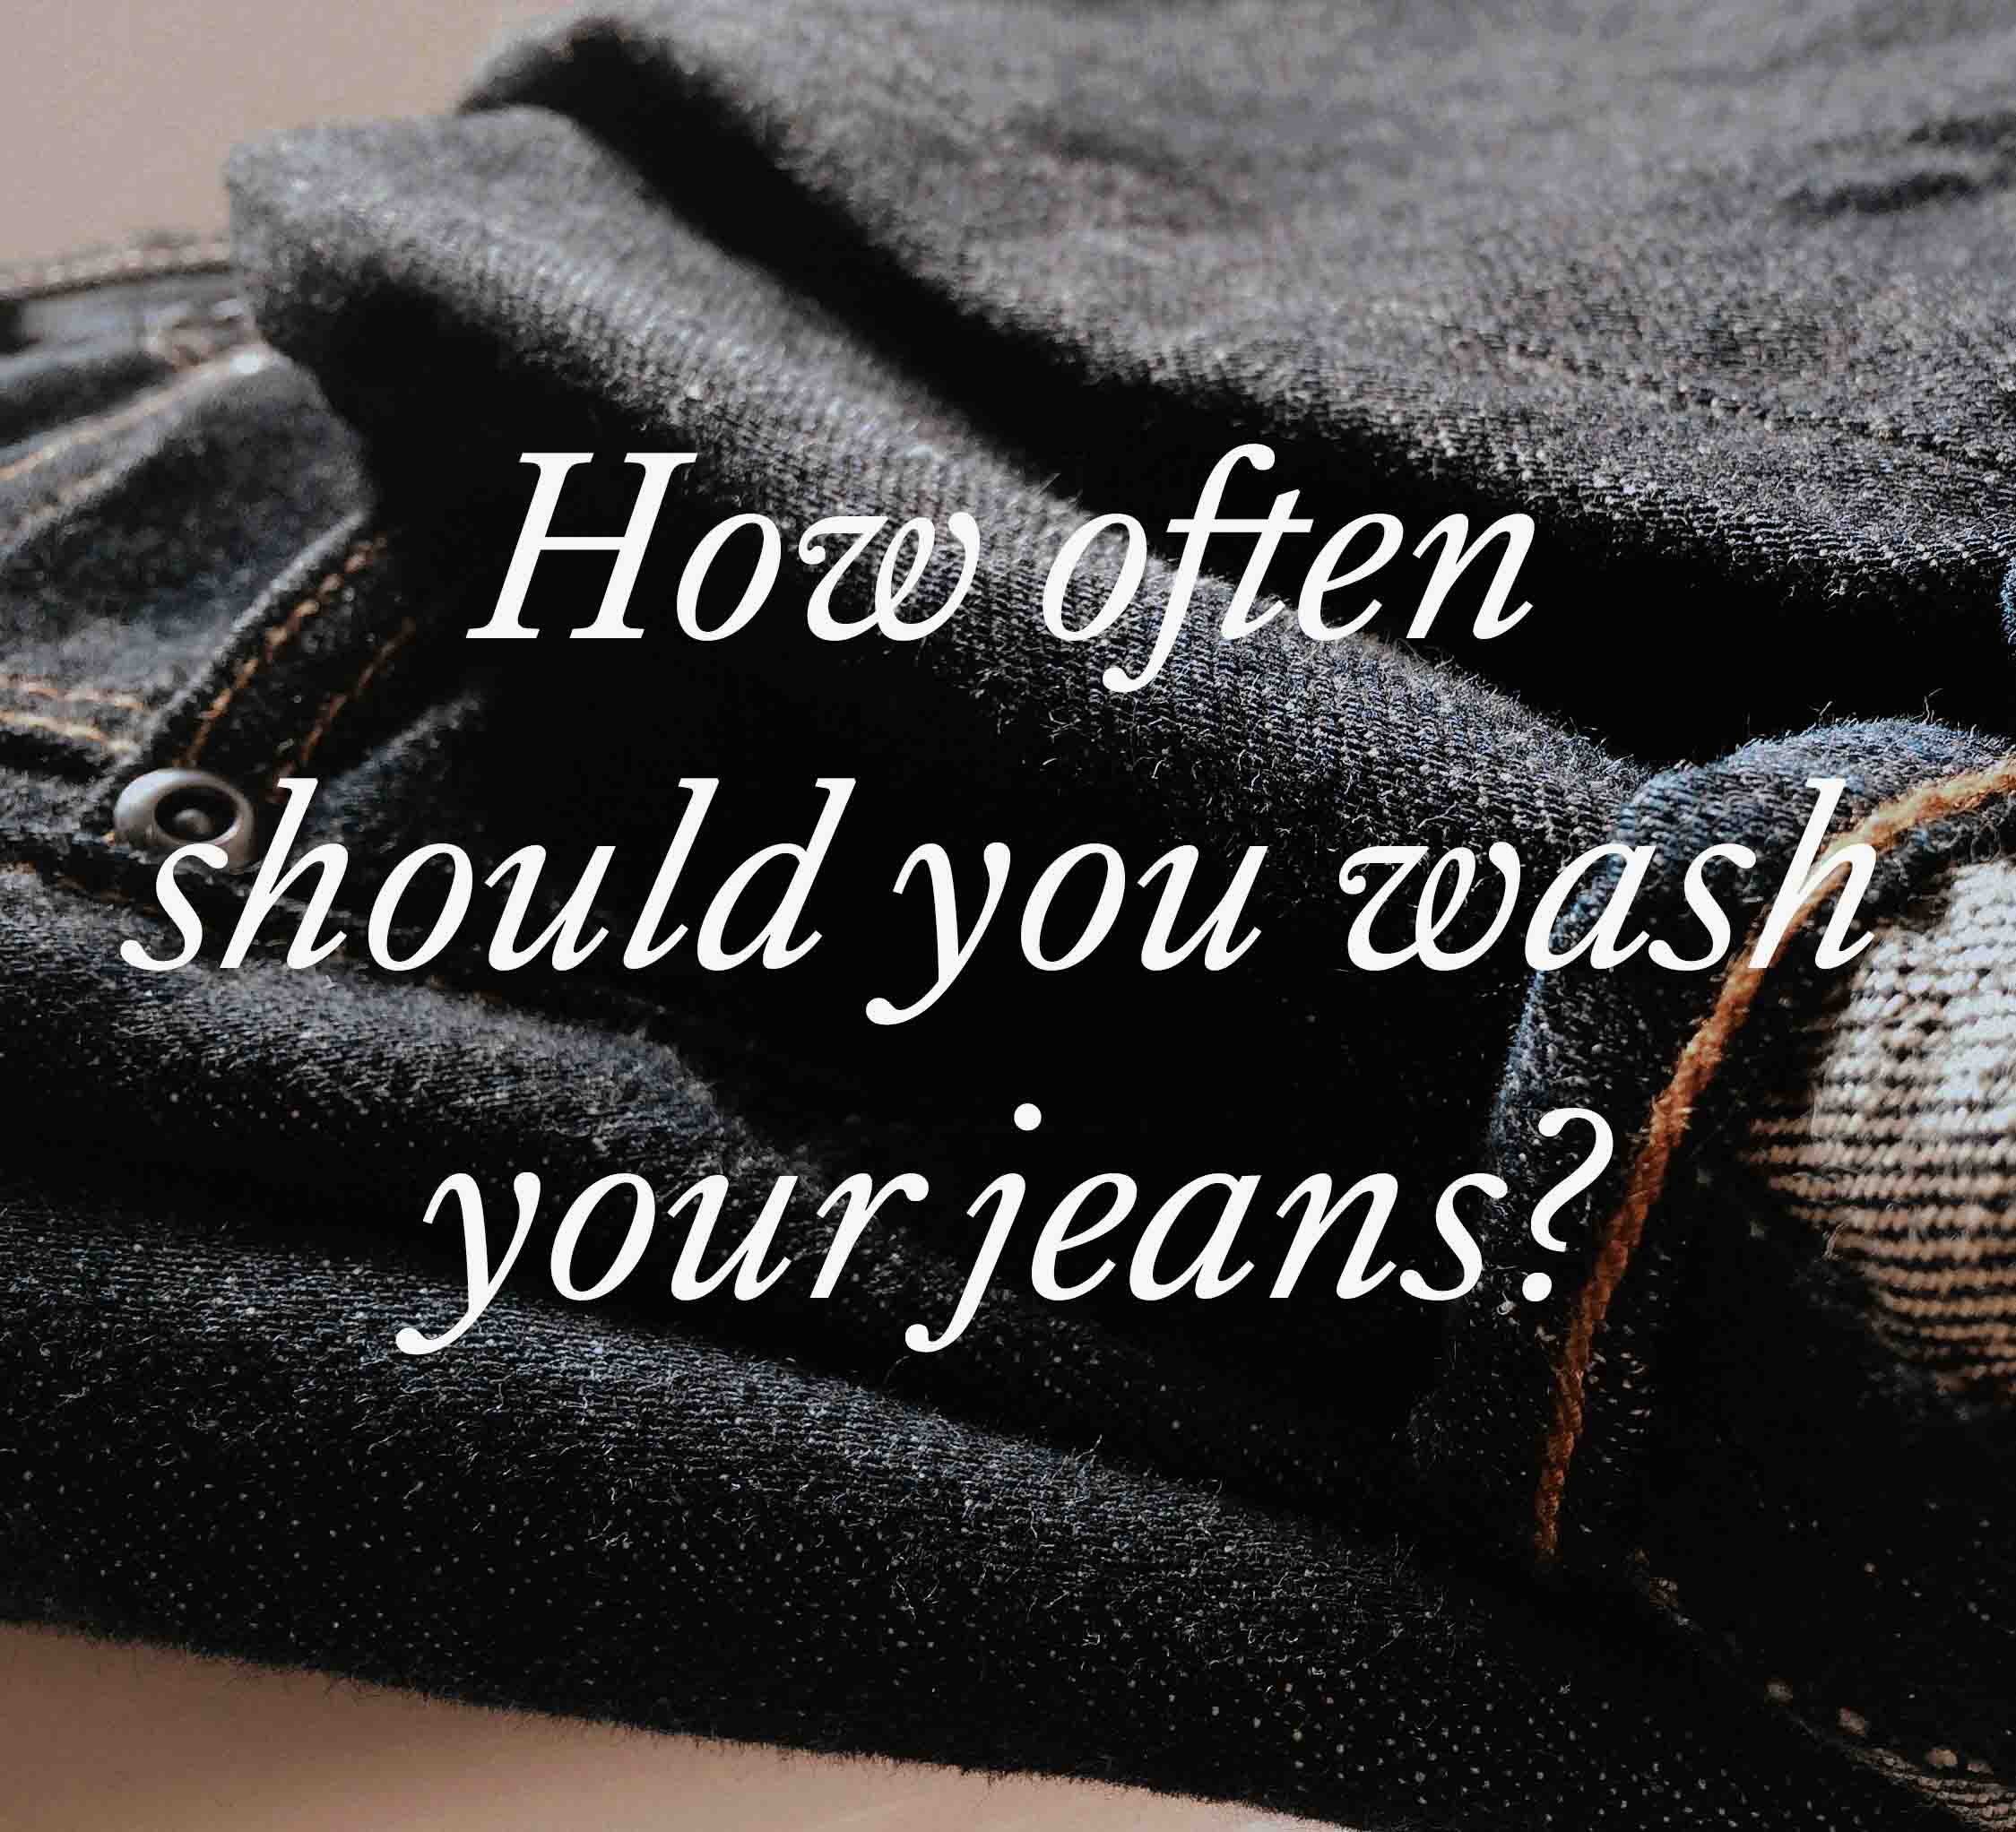 Washing Jeans: How often should you wash your jeans?